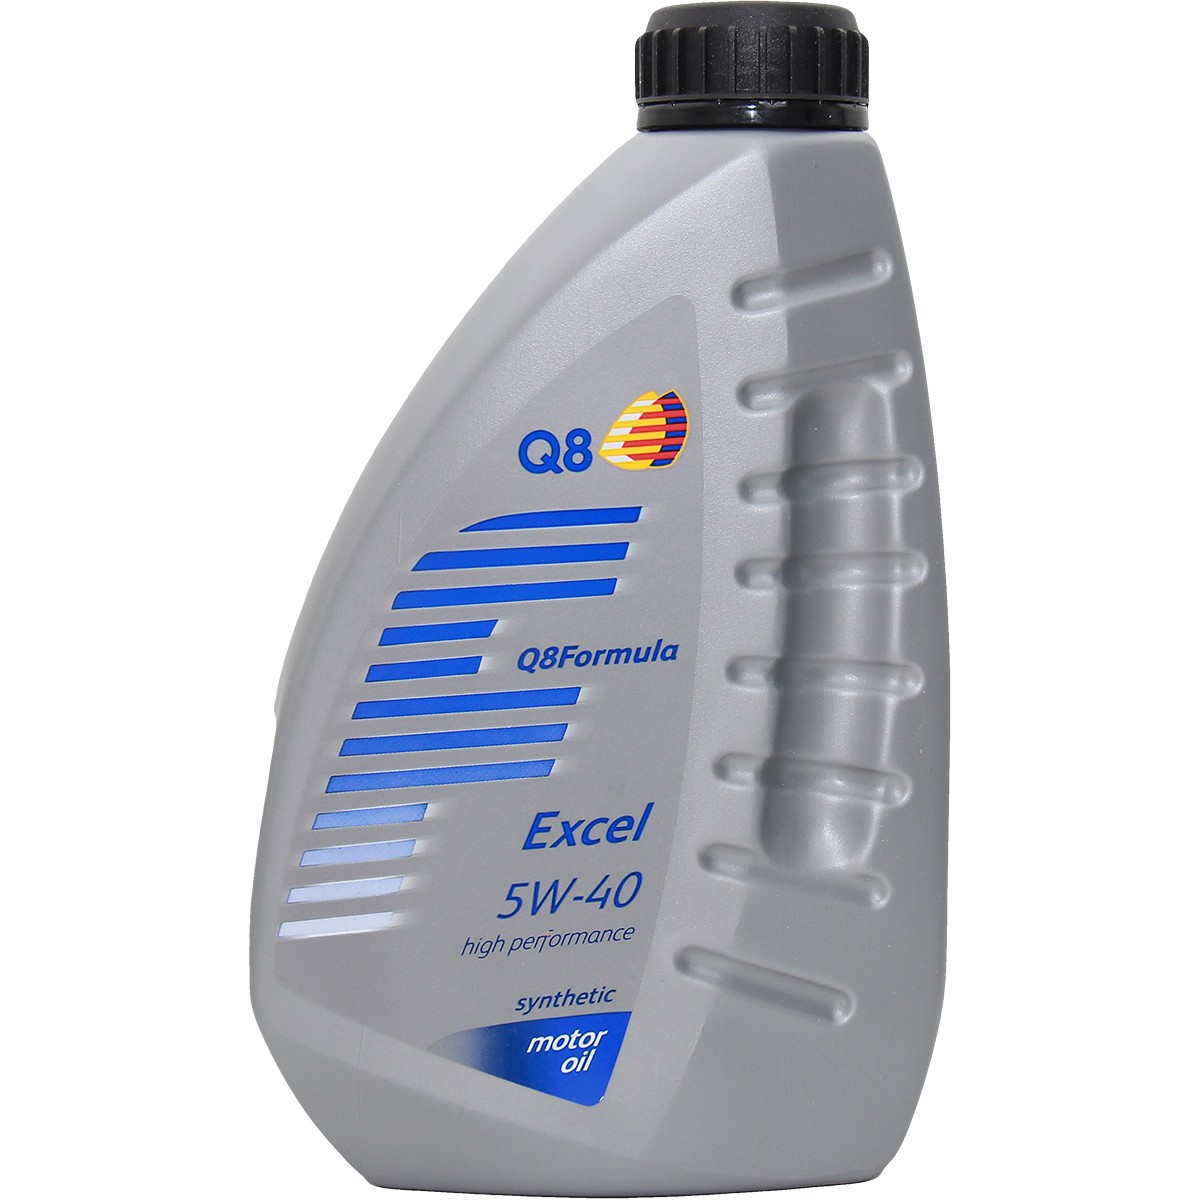 Engine oil Q8Oils 5W-40, 1l, Synthetic Oil longlife 101107201751